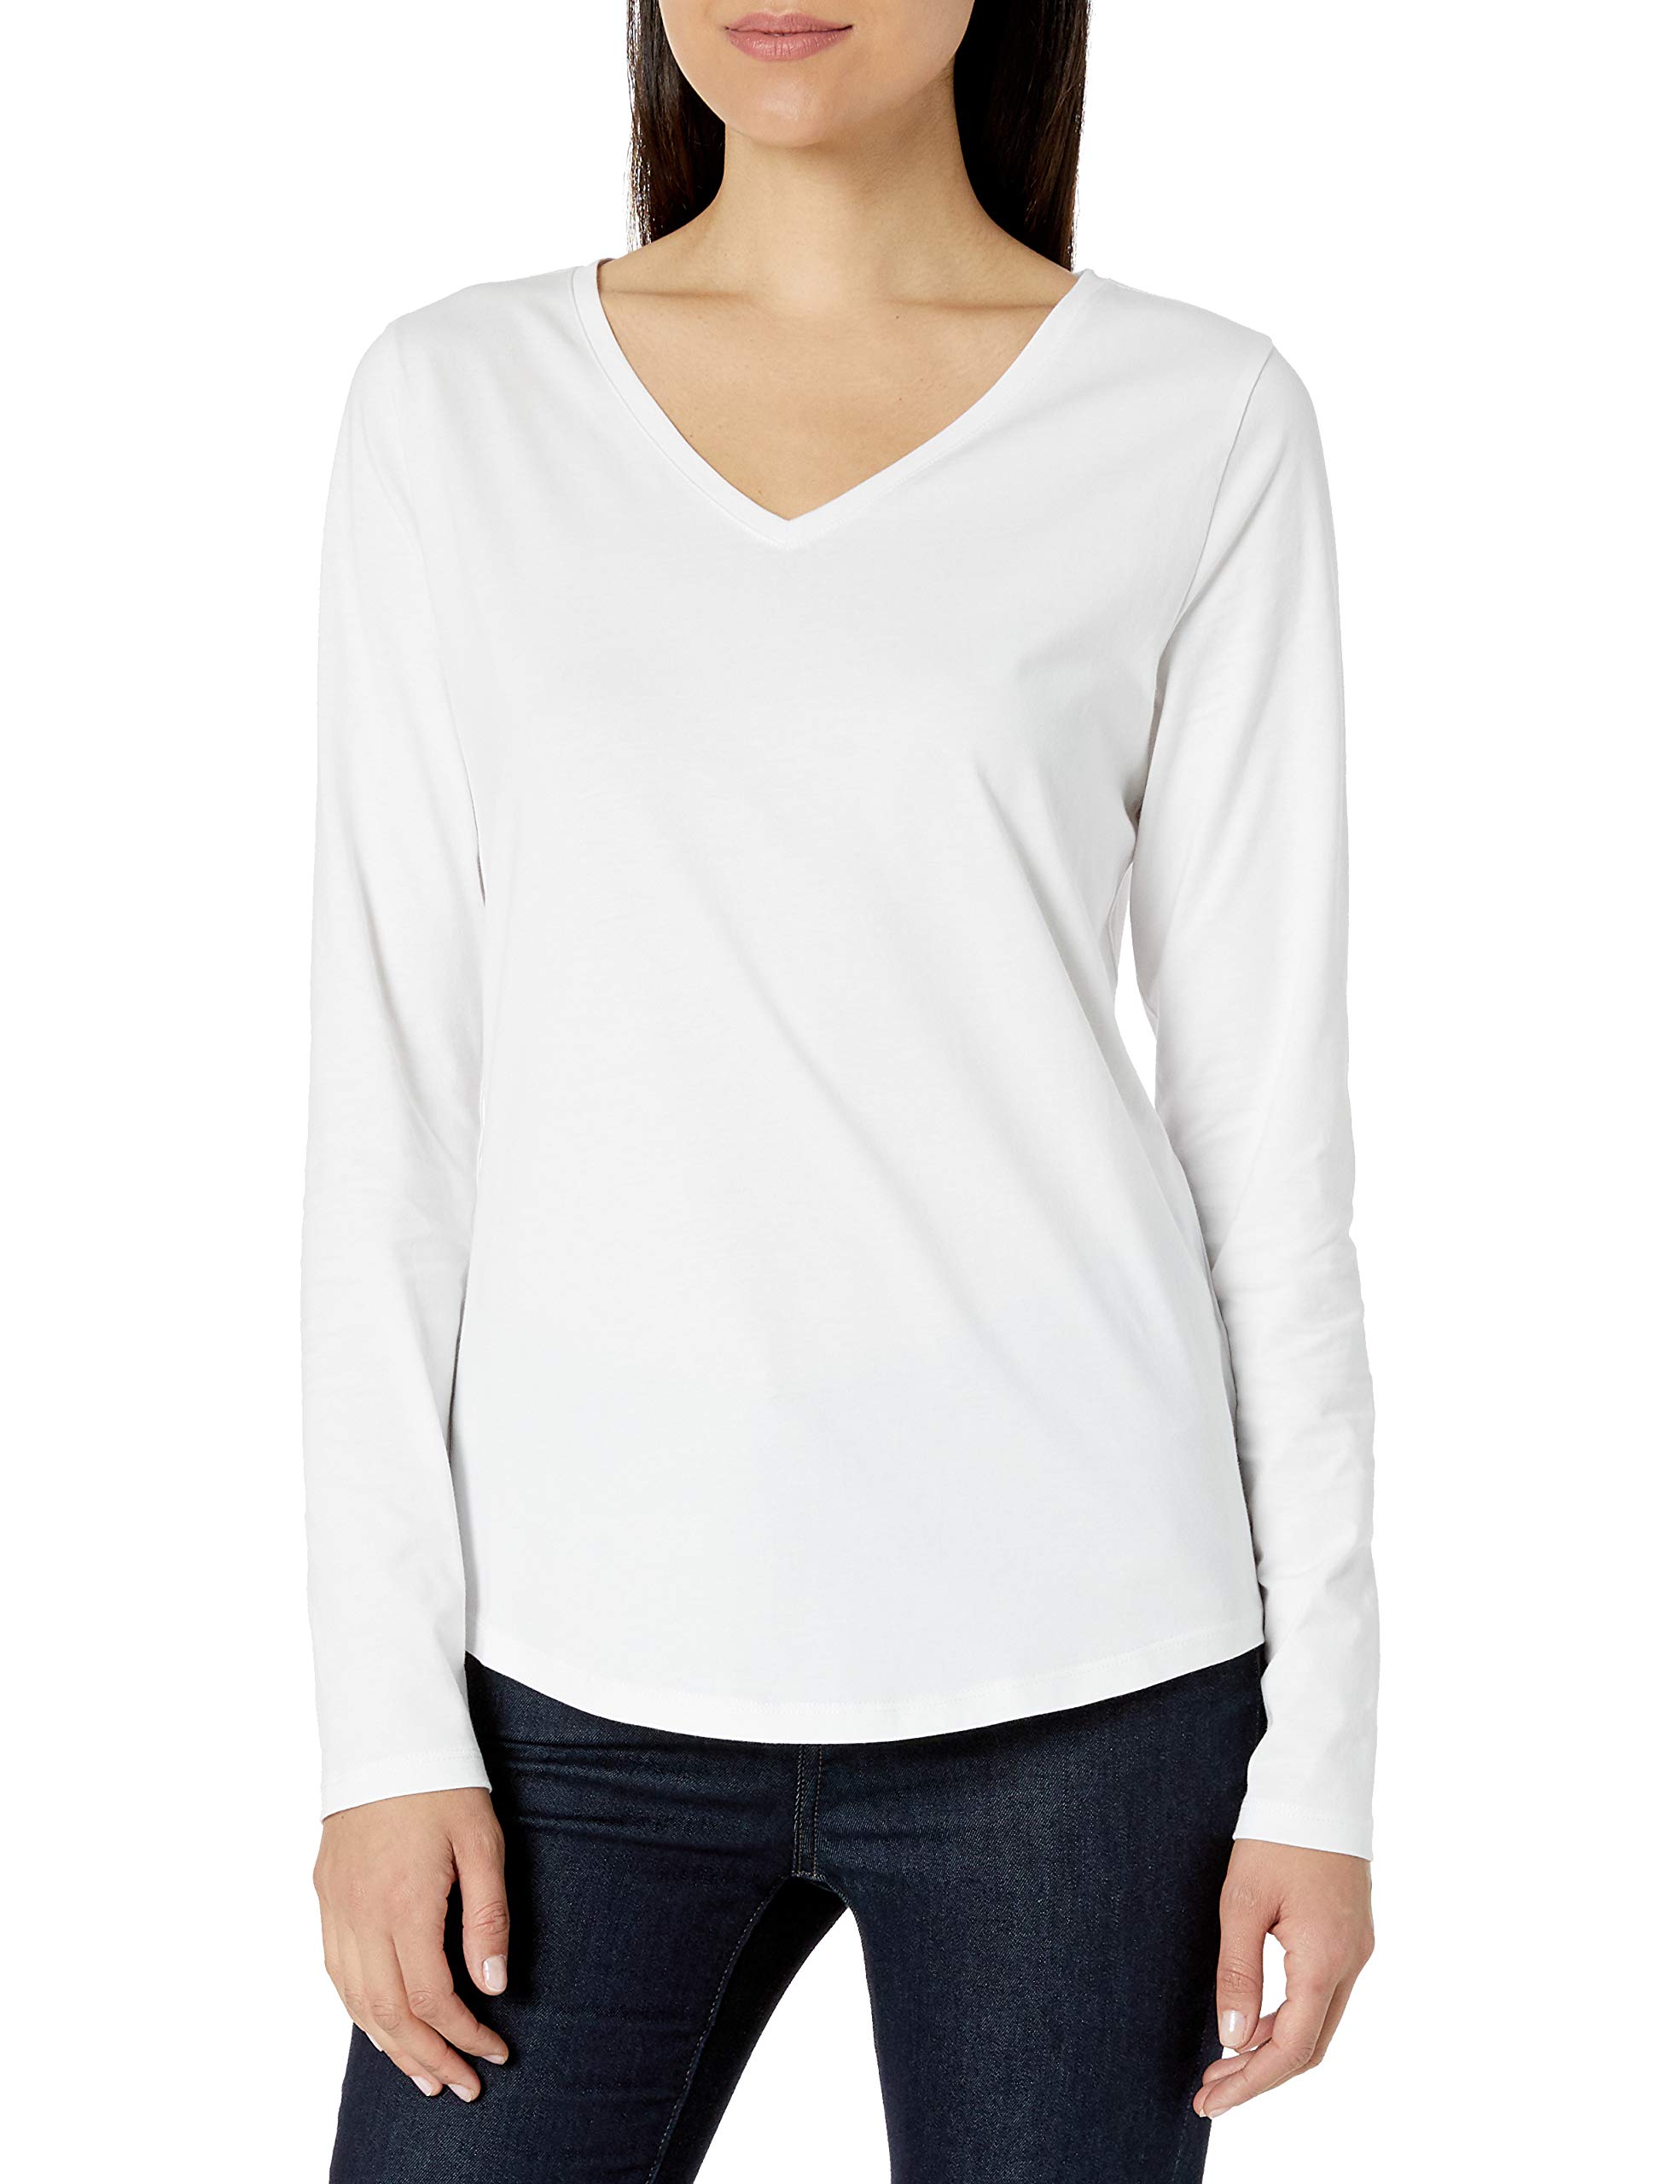 Amazon Essentials Women's Classic-Fit 100% Cotton Long-Sleeve V-Neck T-Shirt $5.30 + Free Shipping w/ Prime or on $35+